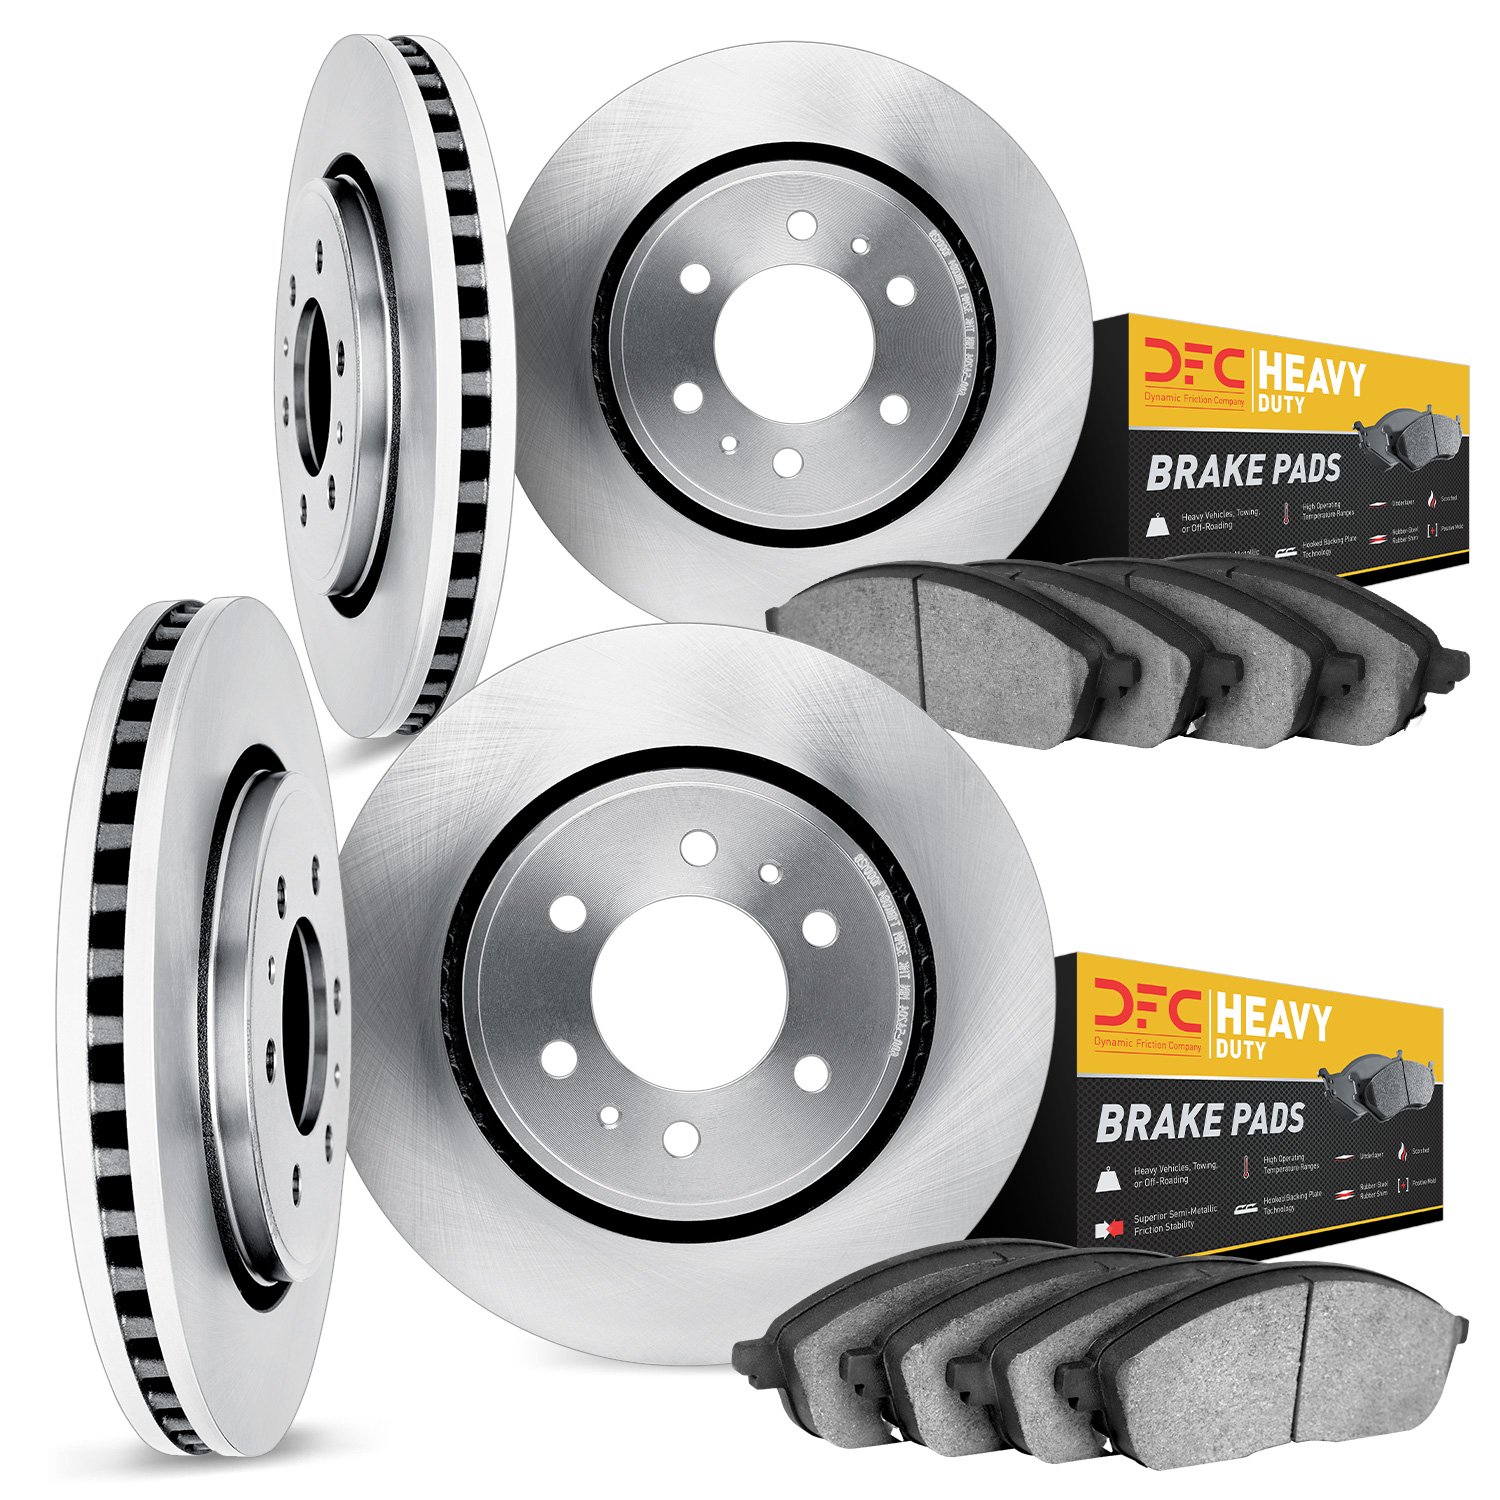 6204-99246 Brake Rotors w/Heavy-Duty Brake Pads Kit, 2009-2009 Ford/Lincoln/Mercury/Mazda, Position: Front and Rear